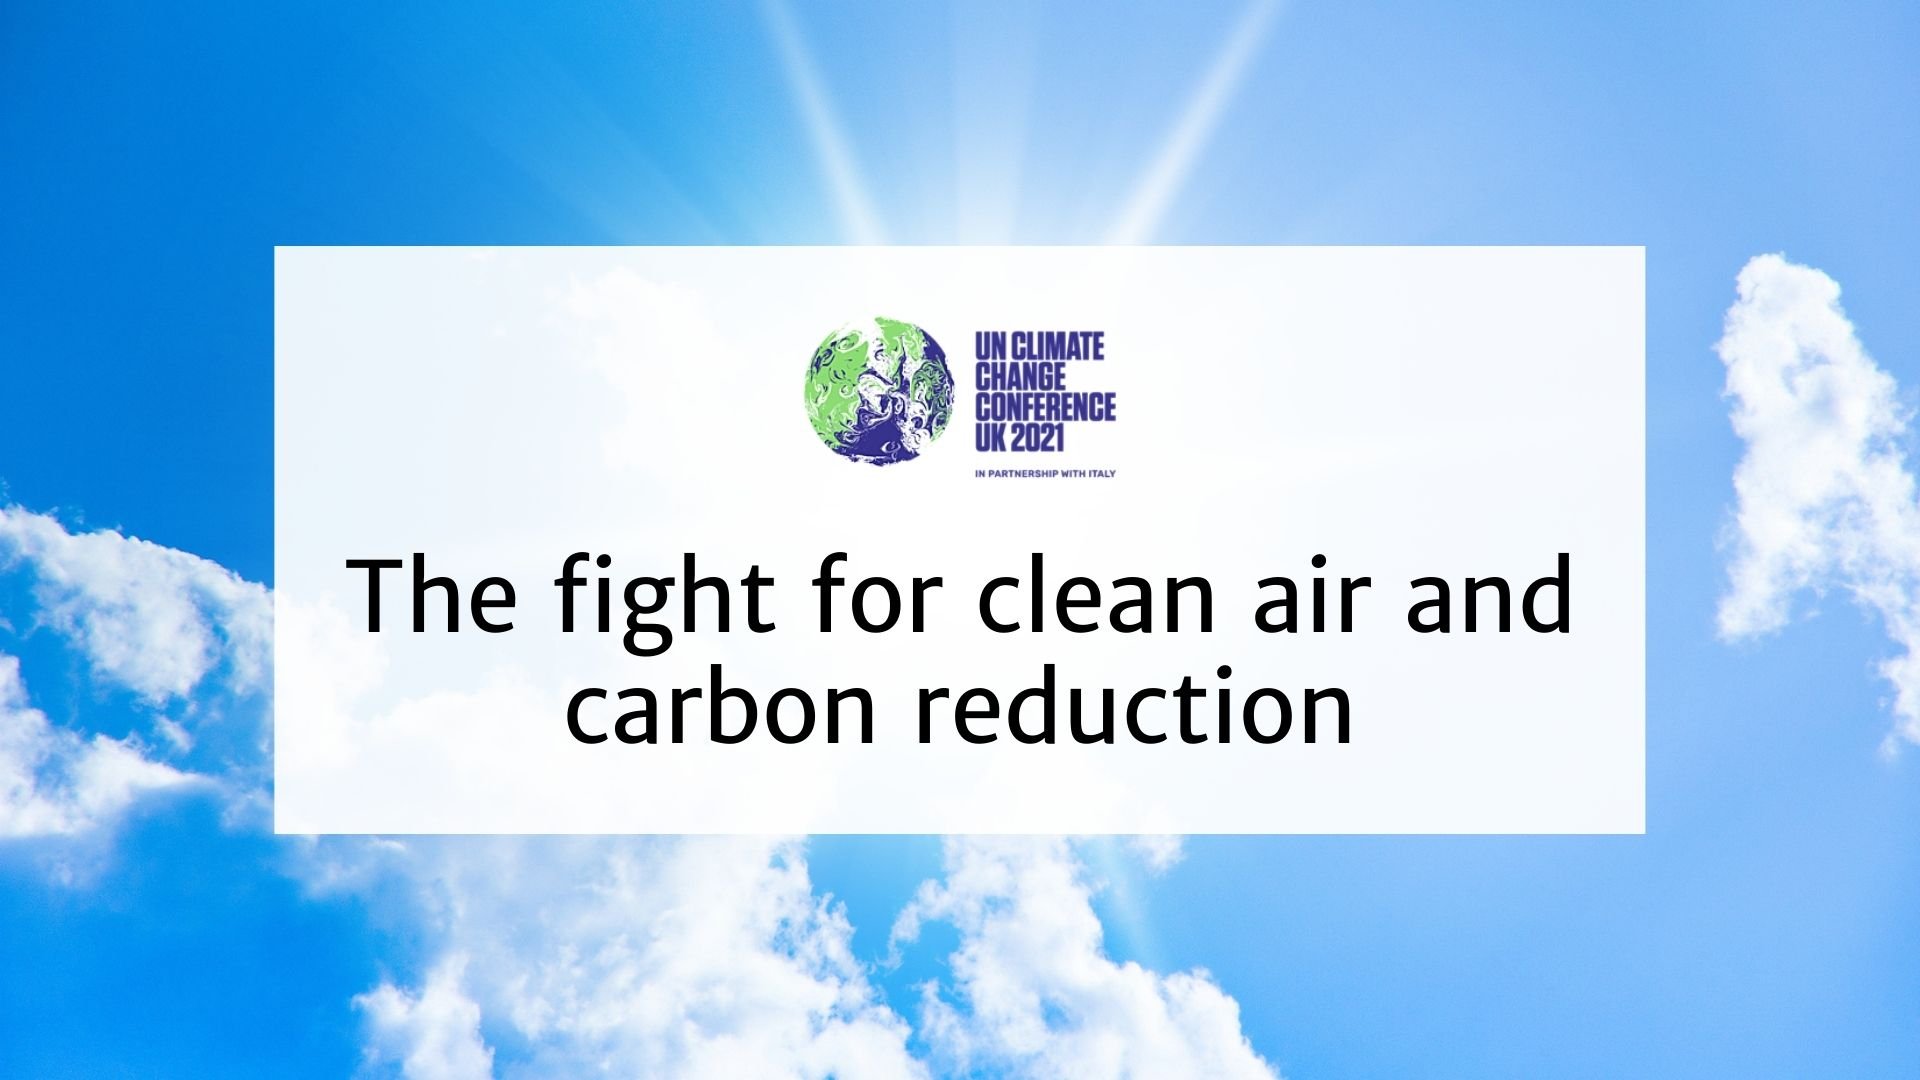 The fight for clean air and carbon reduction